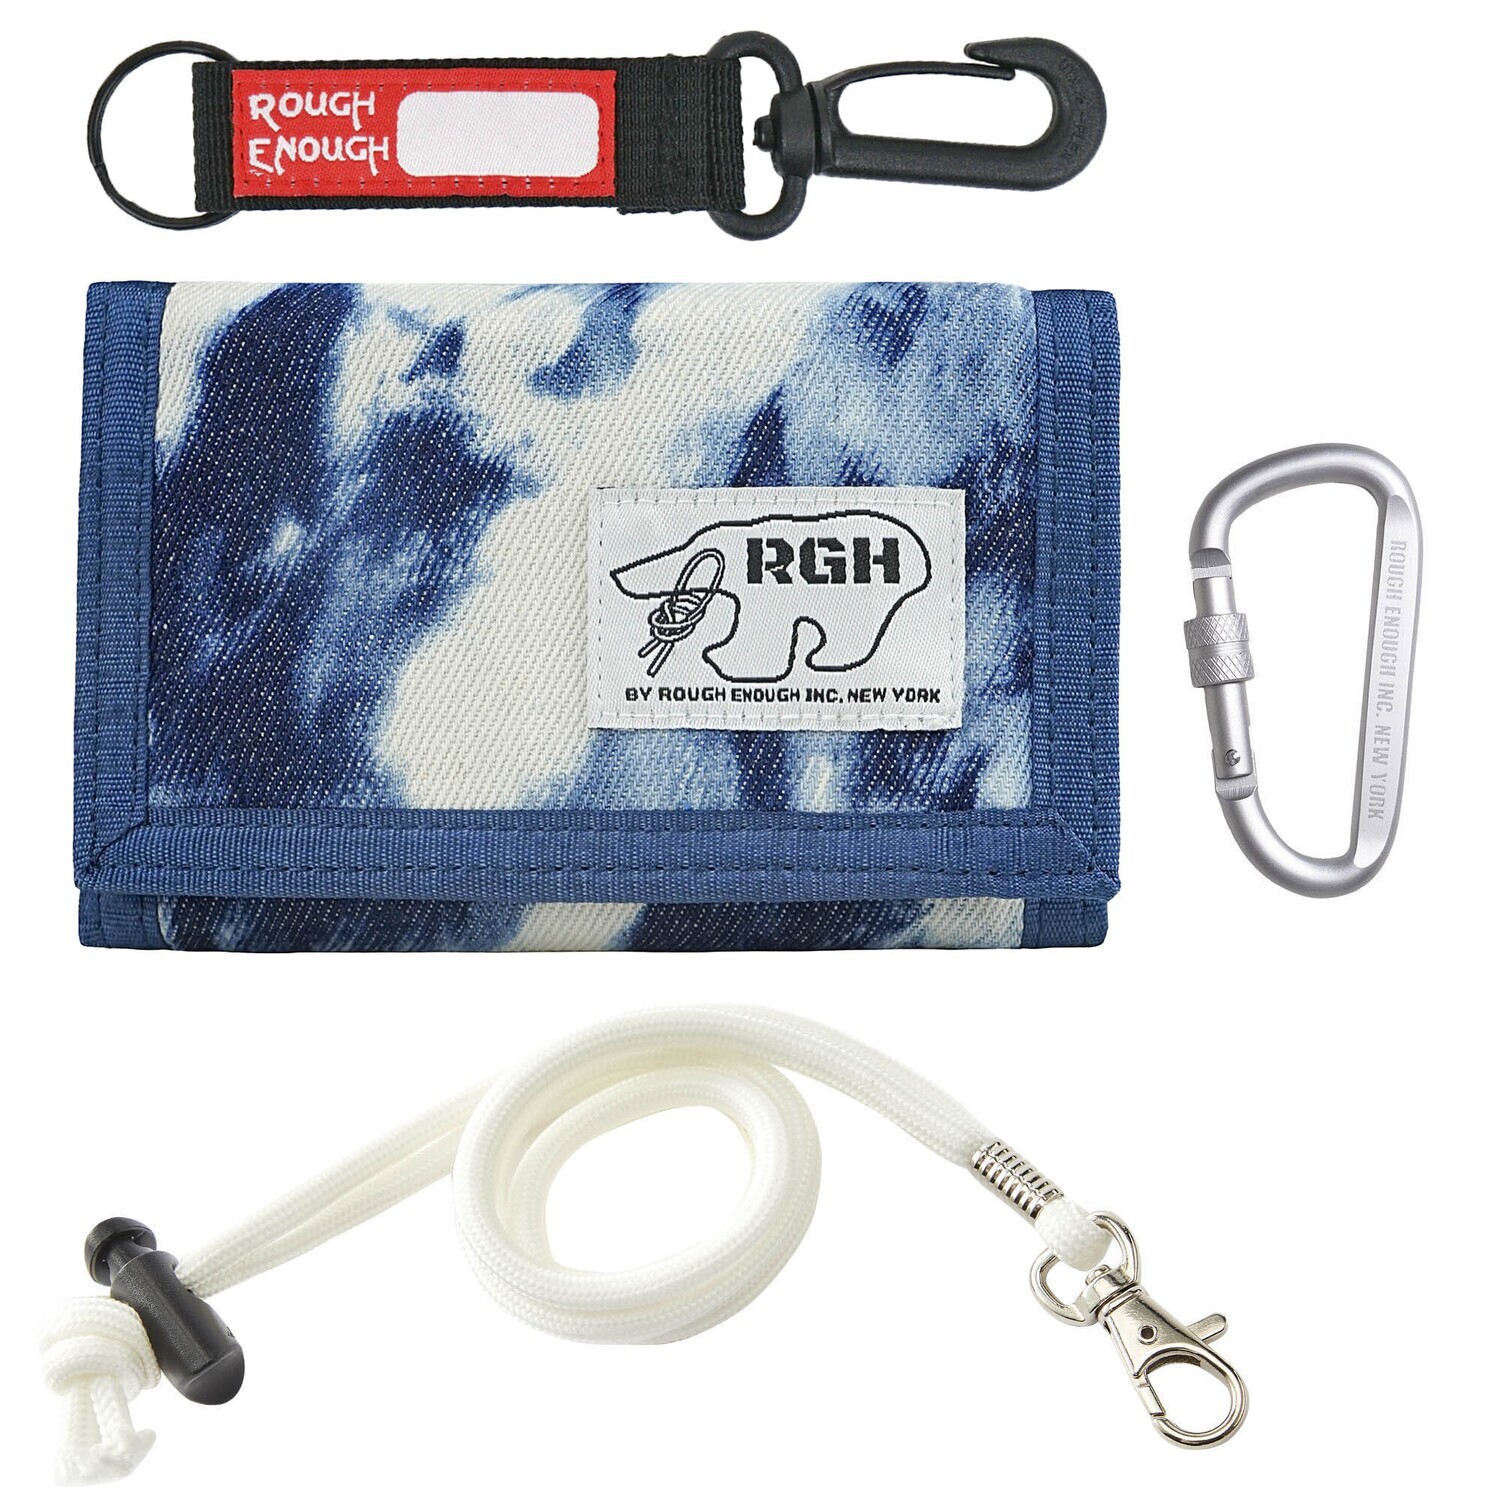 RE8561 Rough Enough Kids Wallets for Boys Lanyard Wallet for Teens Blue